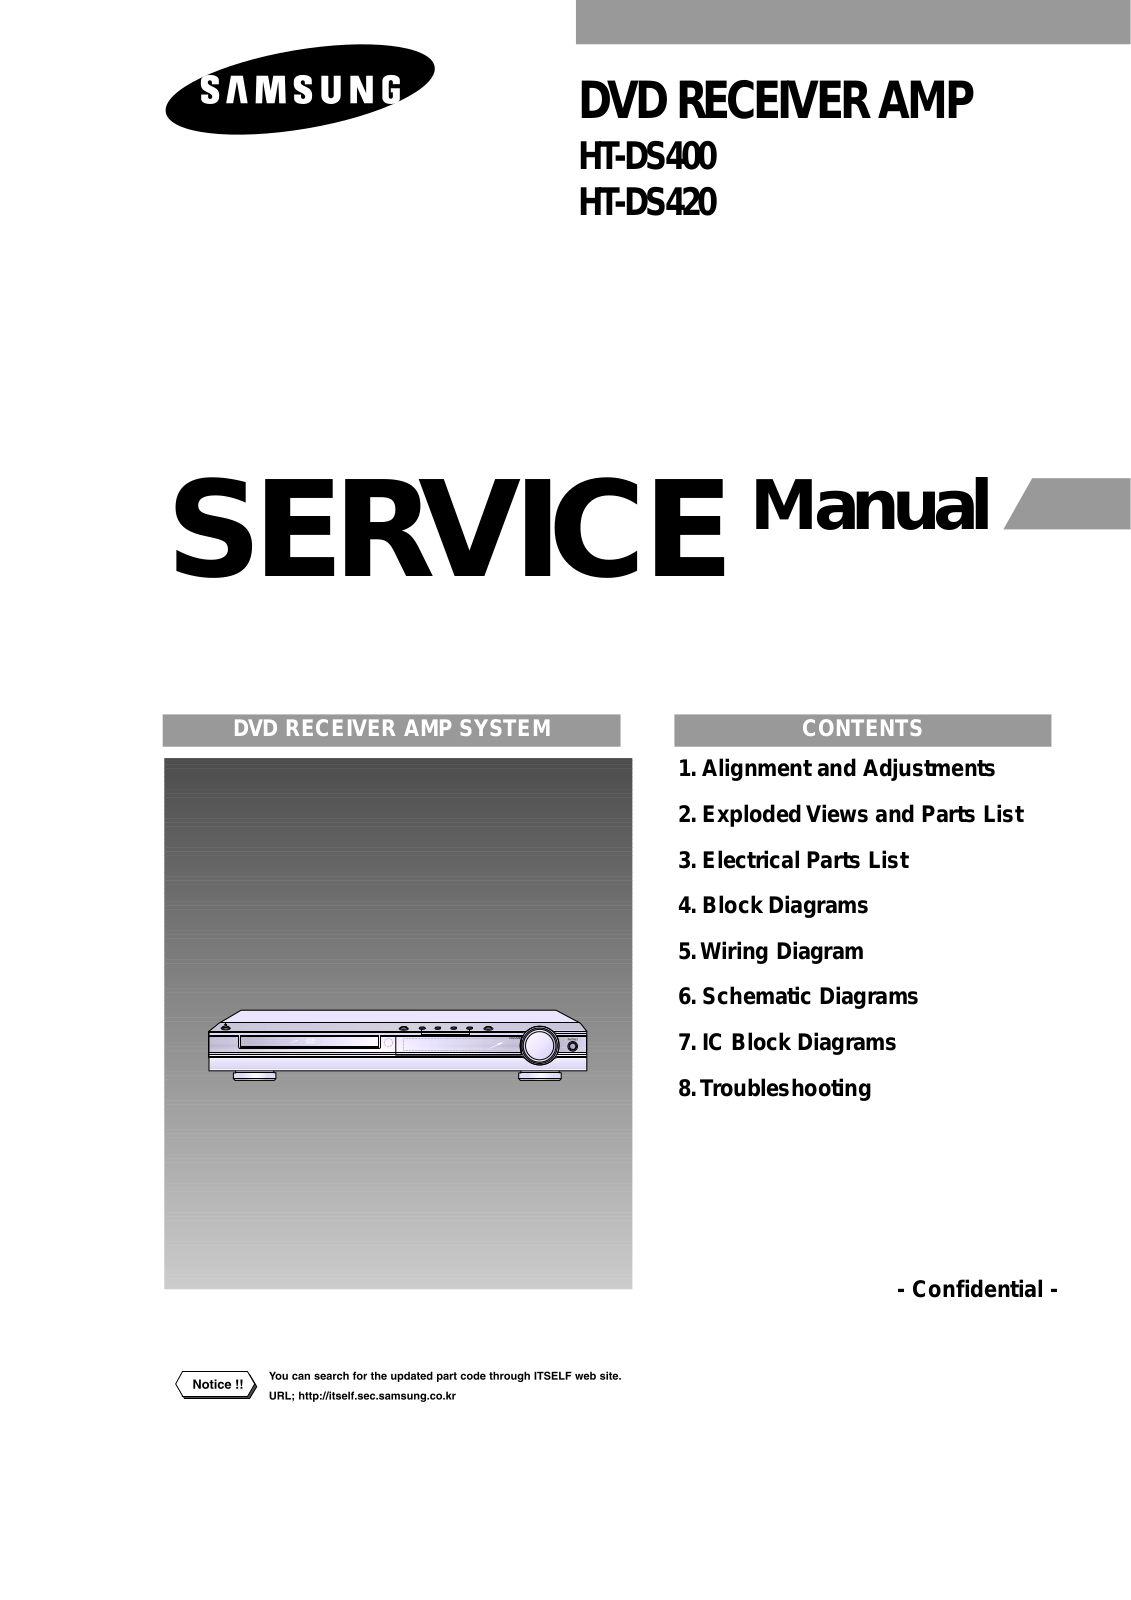 Samsung HT-DS400, HT-DS420 Service Manual